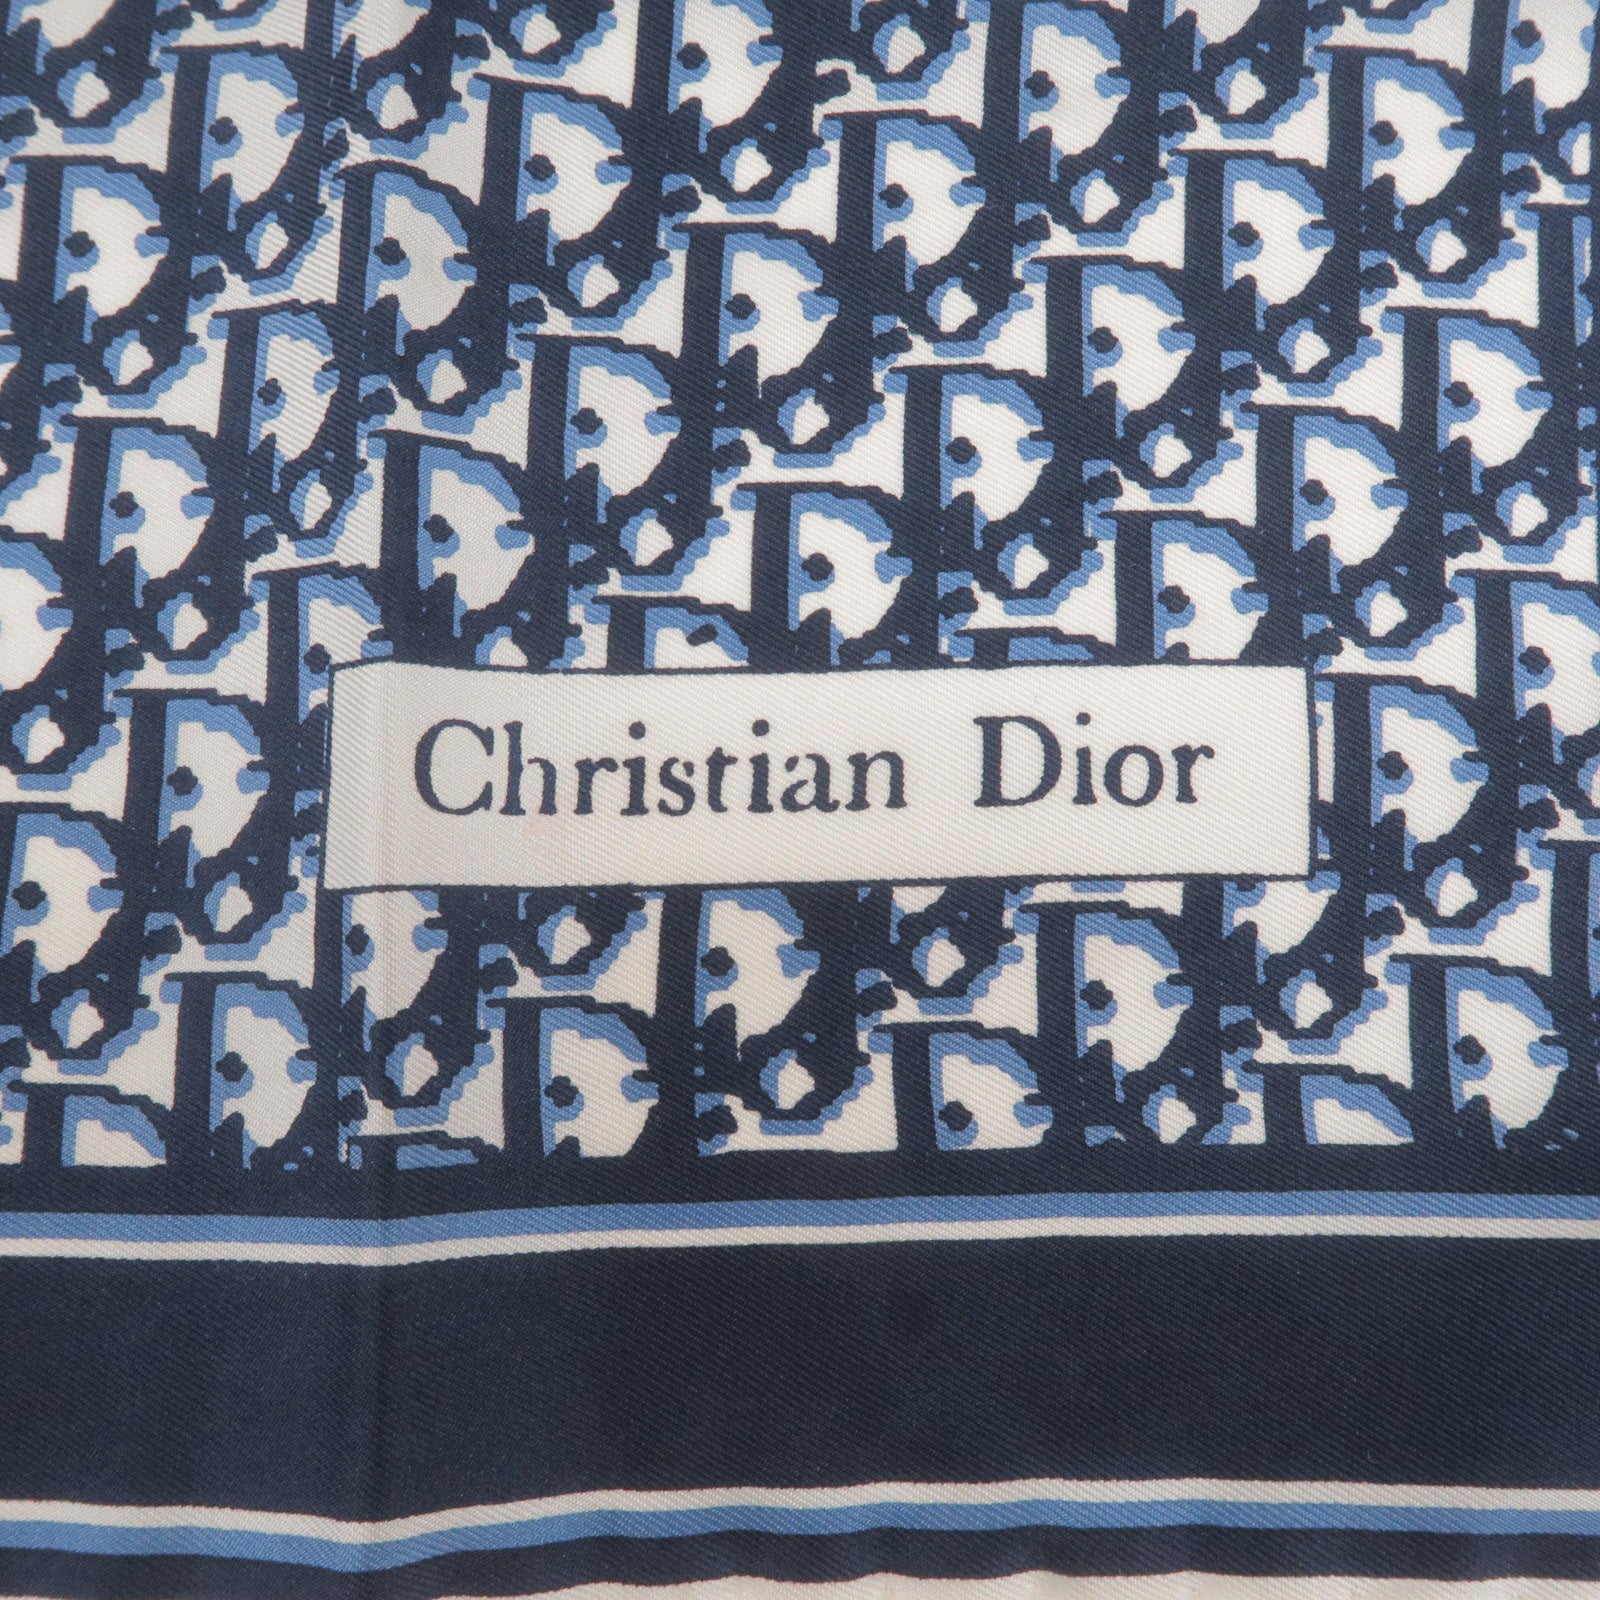 How can I spot a fake Dior silk scarf? - Questions & Answers